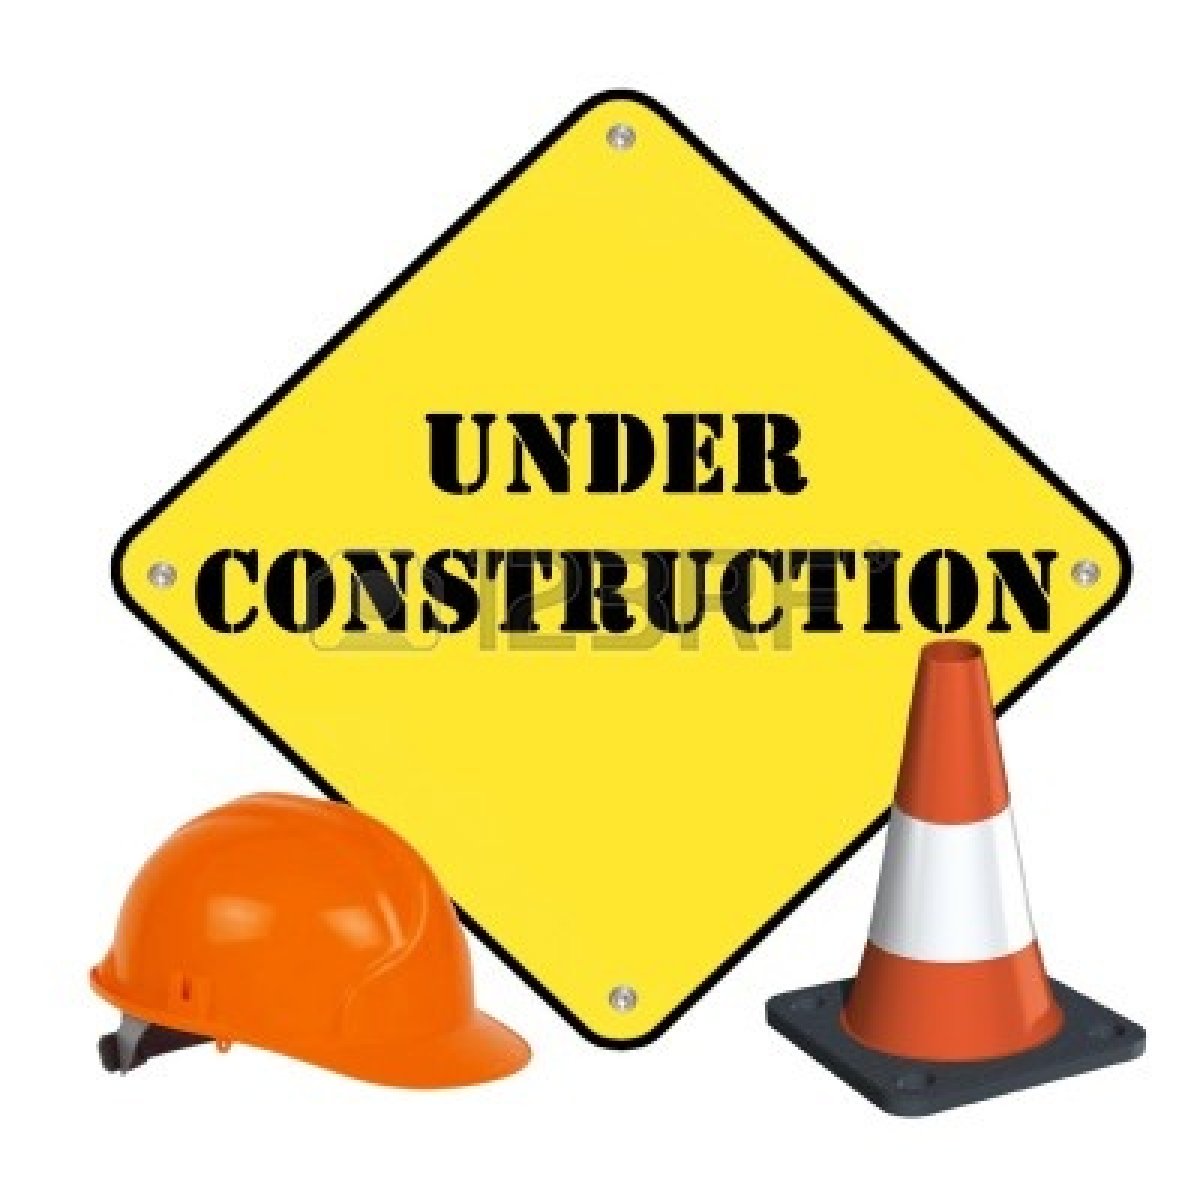 Under construction clipart free clipart images